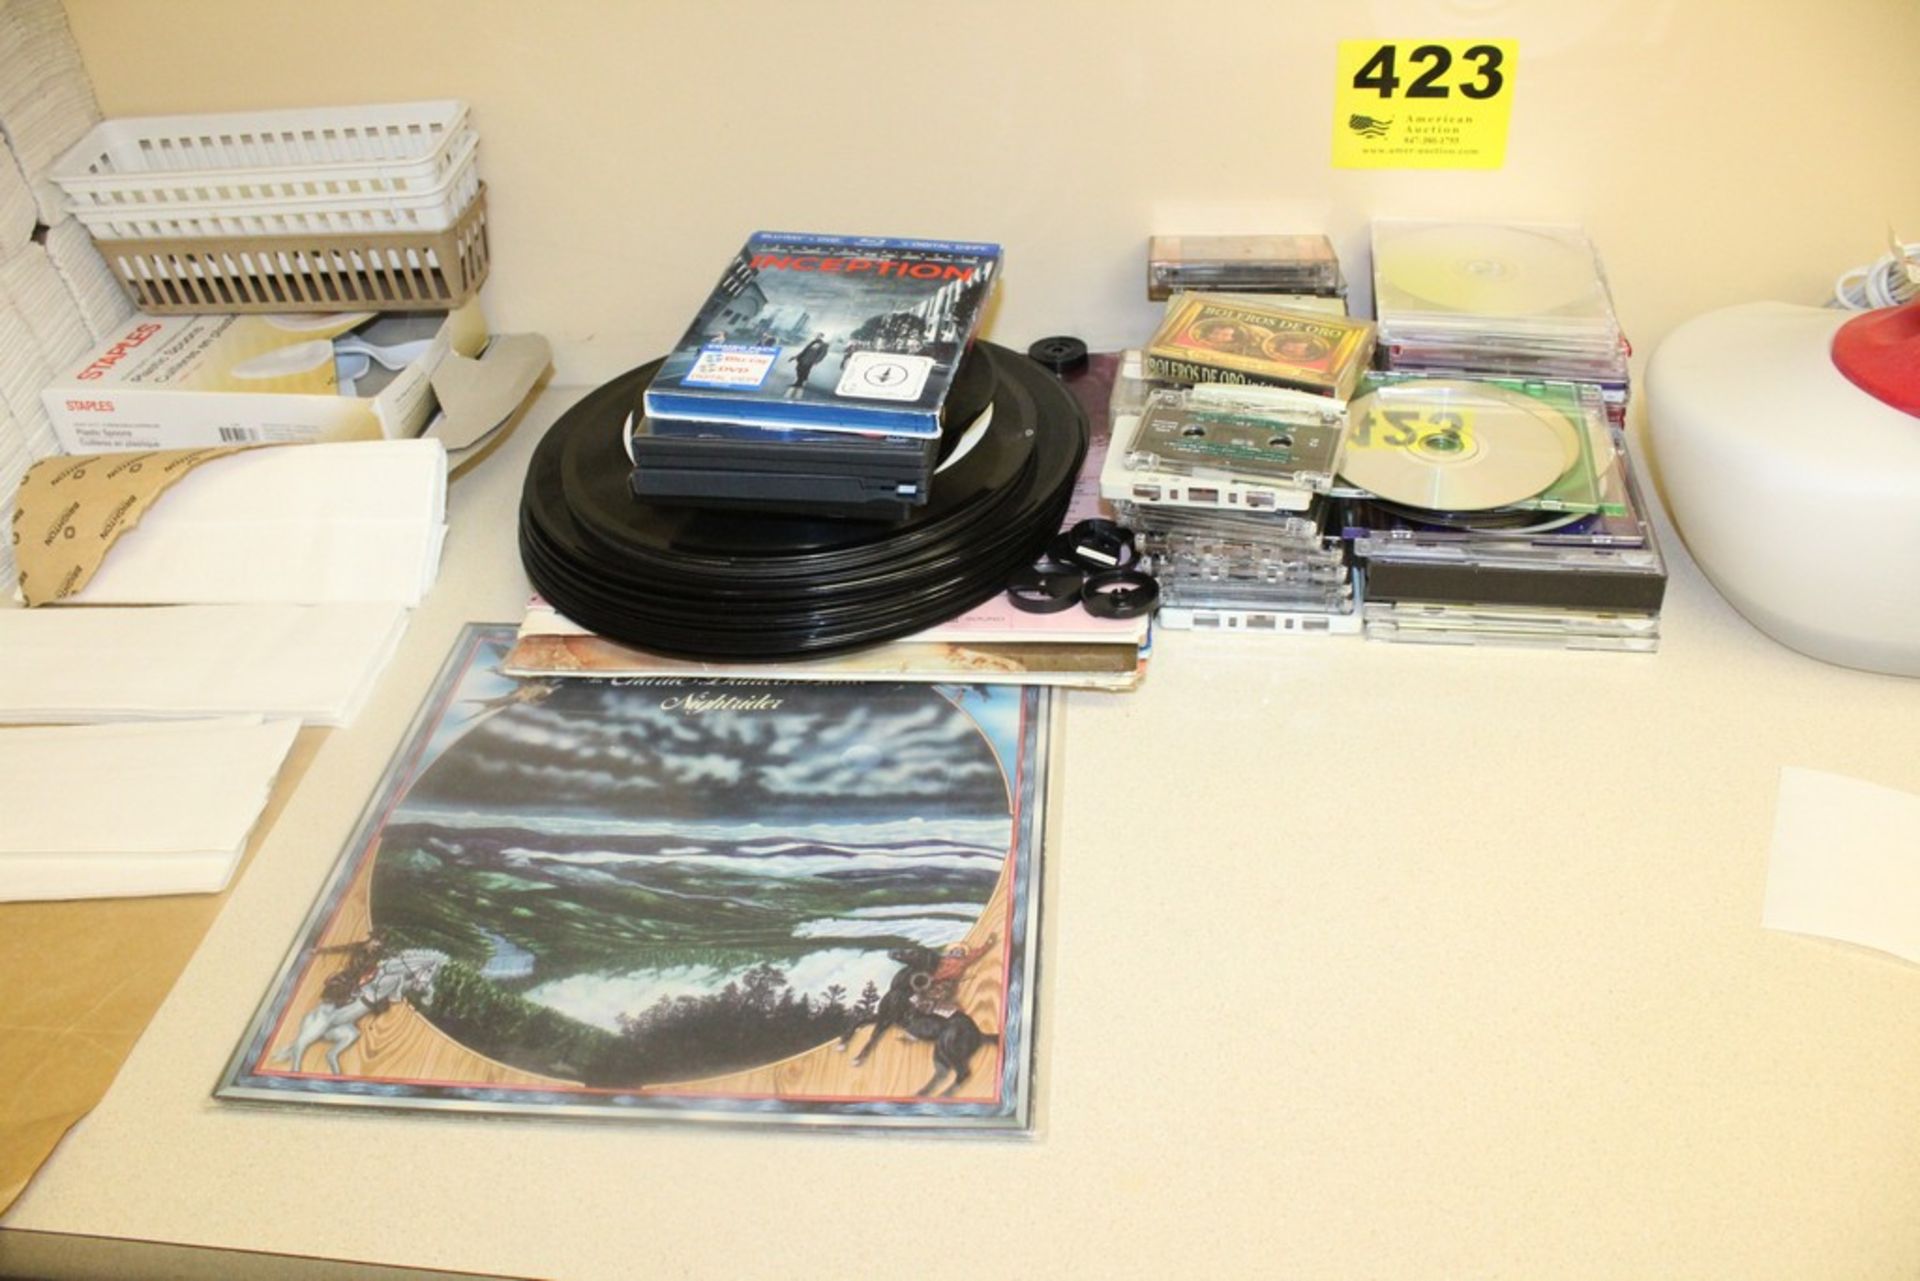 LARGE ASSORTMENT OF DVD'S, CD'S, CASSETTES AND PHONOGRAPH RECORDS(33, 45 AND 78 RPM)